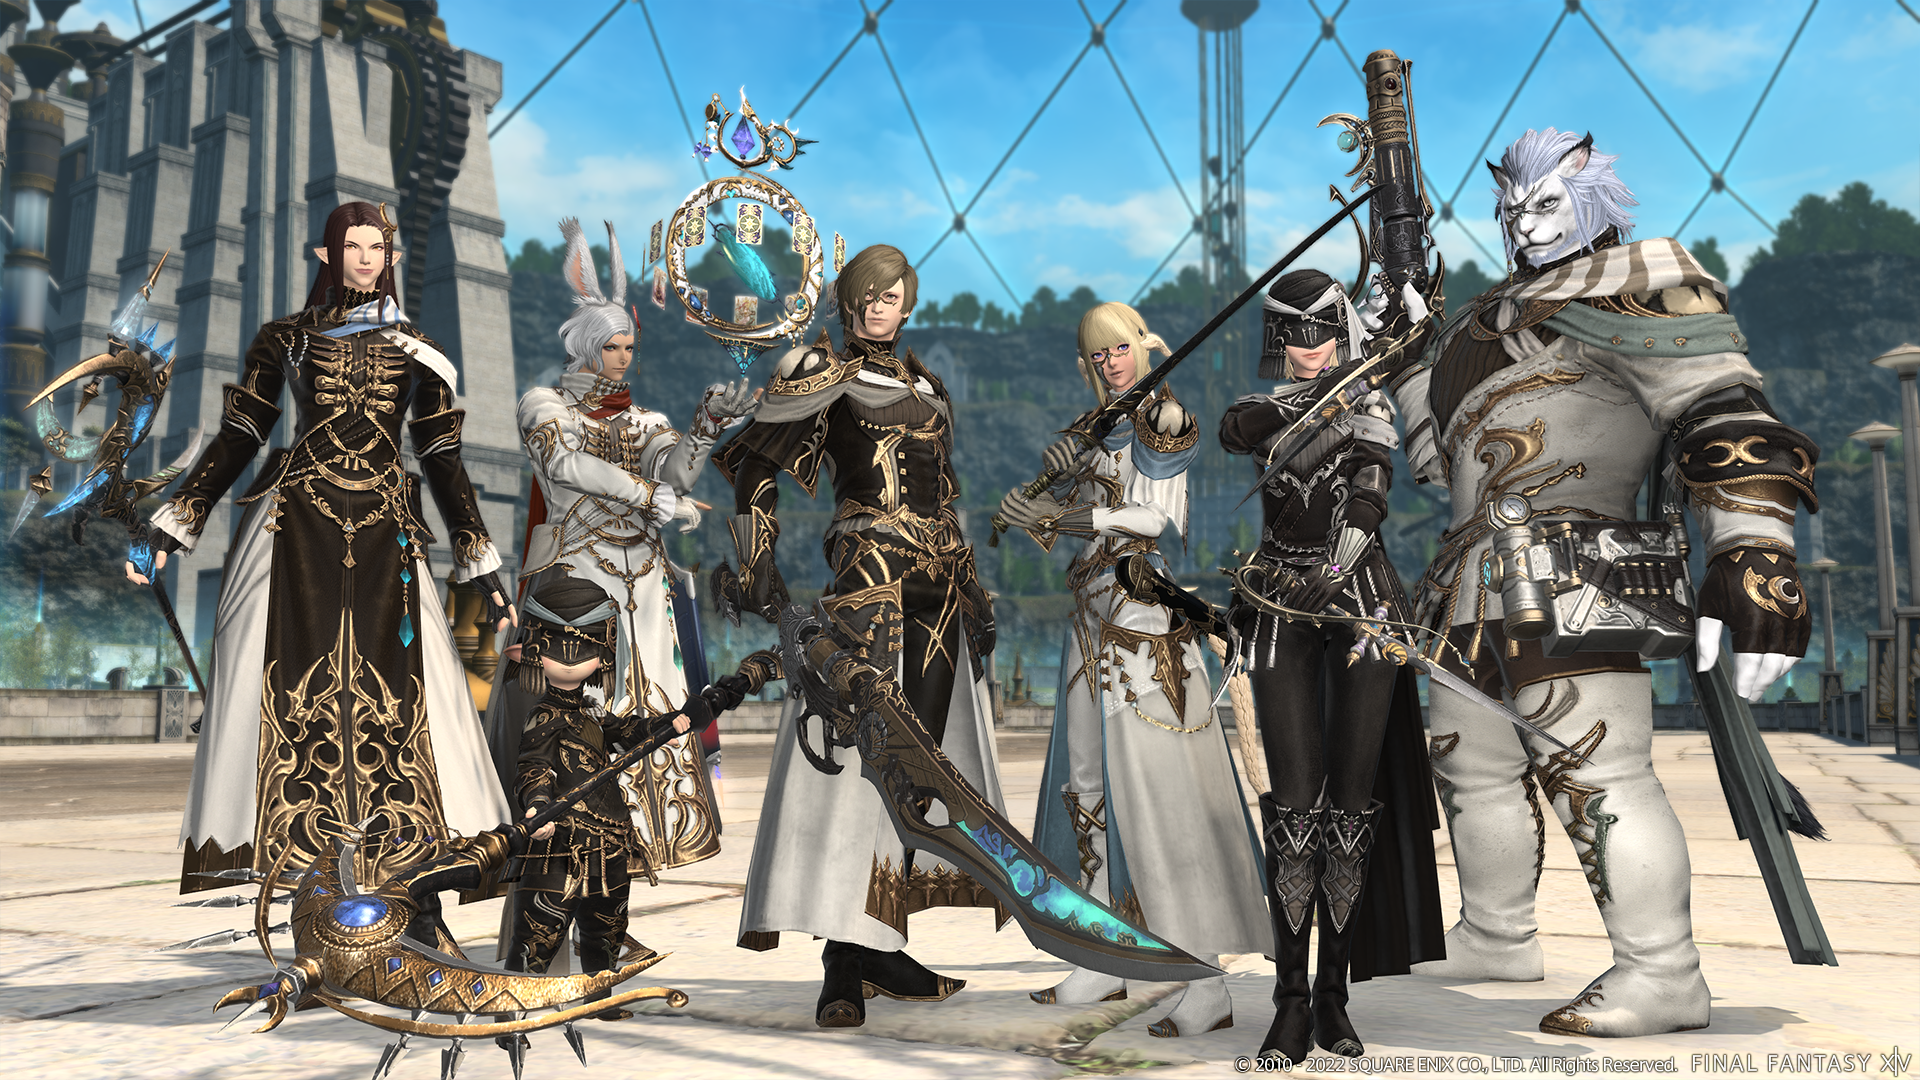 Patch 6.5 Notes | FINAL FANTASY XIV, The Lodestone